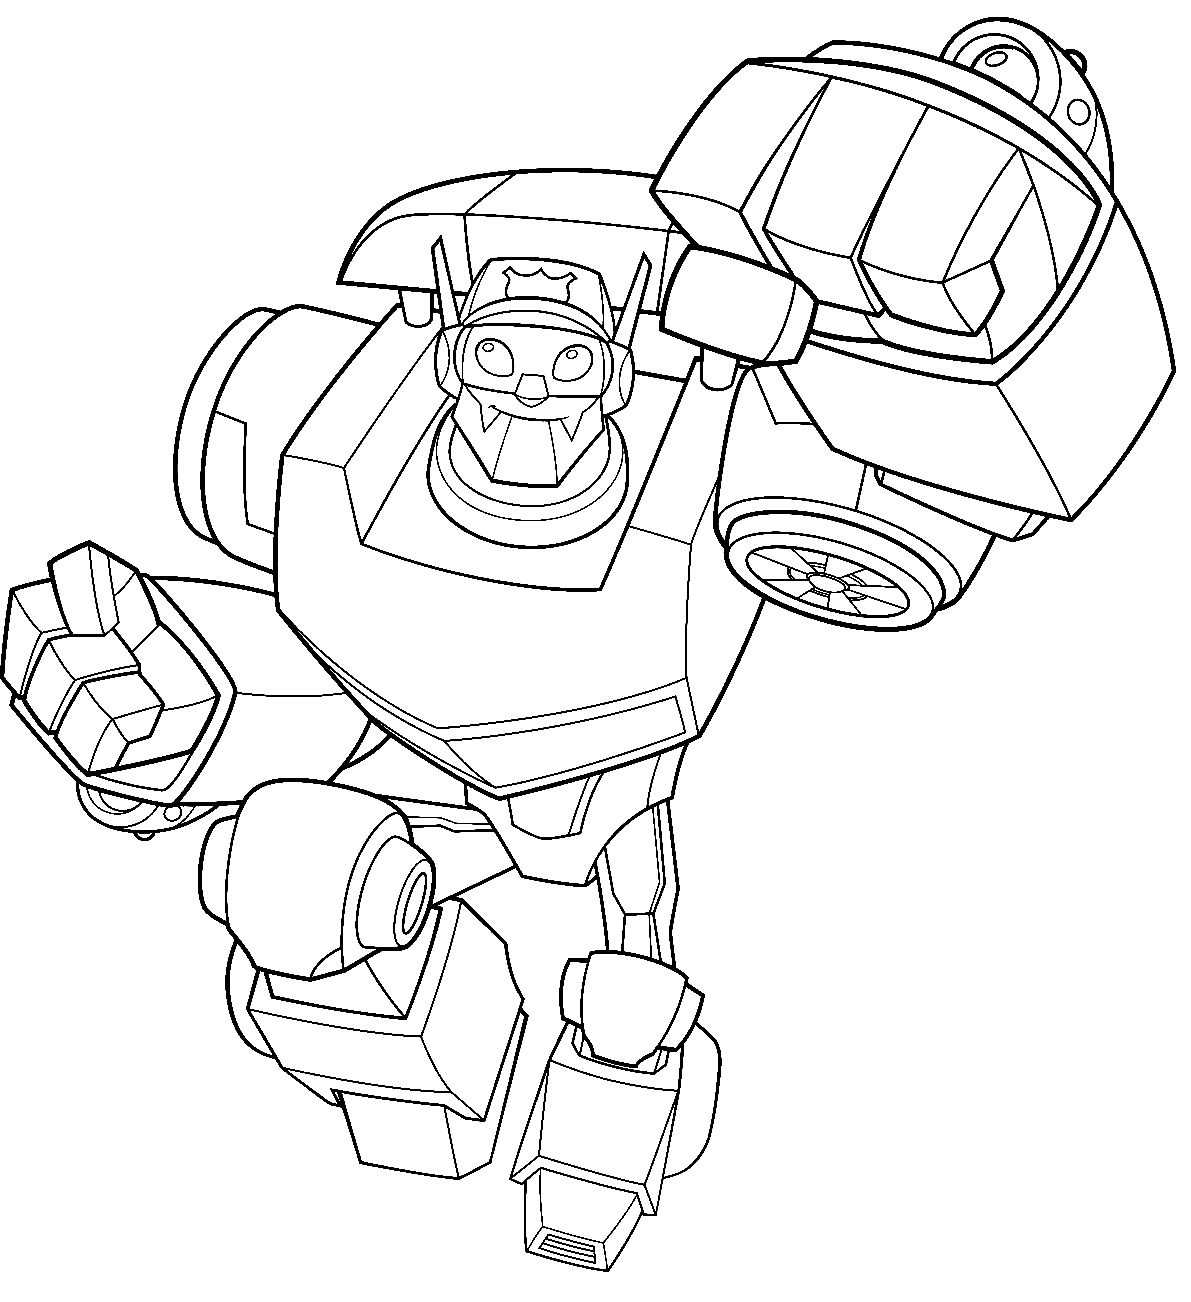 Chase from Transformers Rescue Bots Academy Coloring Page